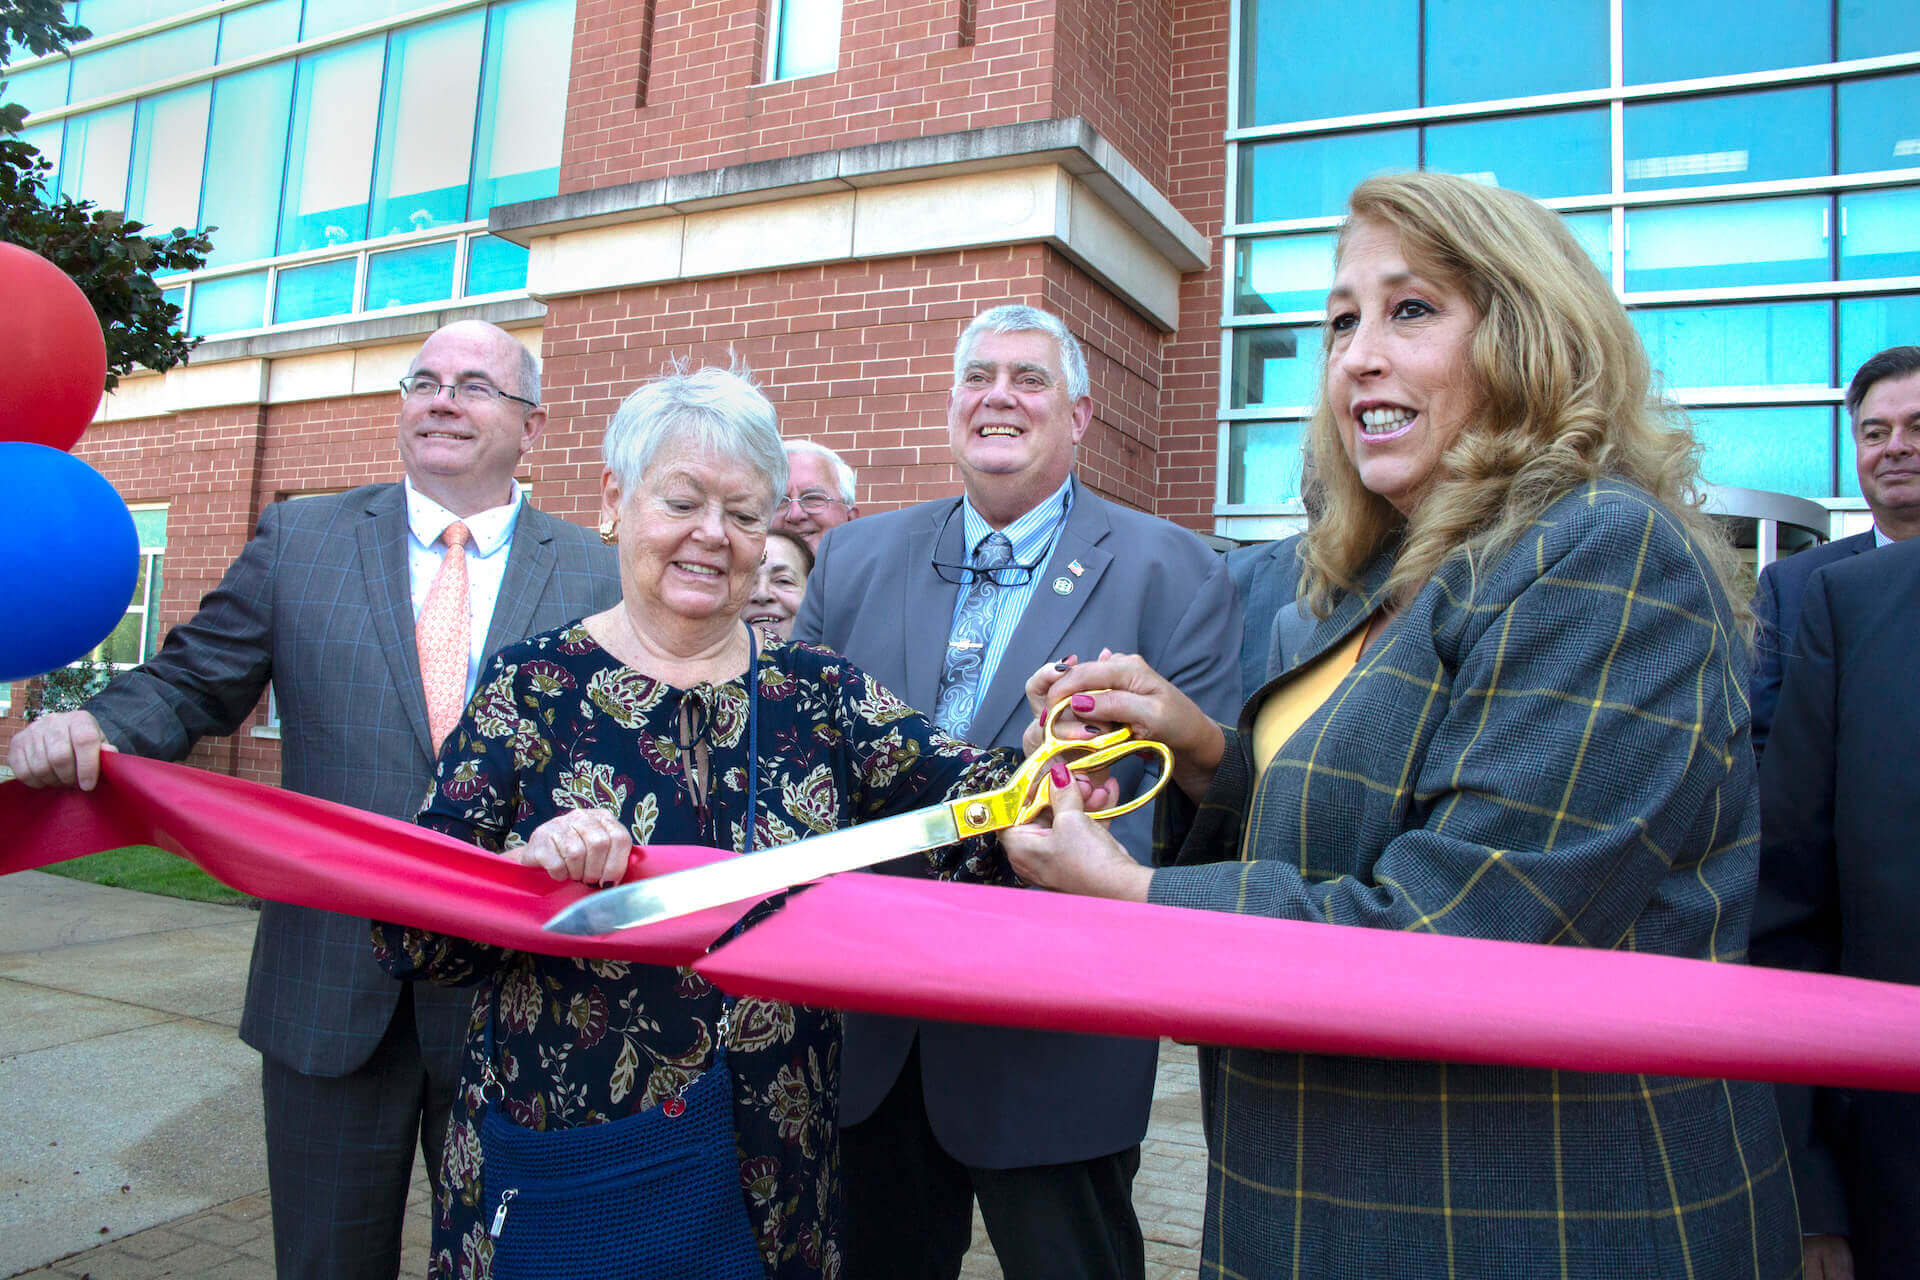 Riverhead Town Supervisor Yvette Aguiar cuts the ribbon with help from Peconic Bay Medical Center Foundation Chairperson Emilie Roy Corey, while Councilmen Kenneth Rothwell, left, and Tim Hubbard, center, look on. Bruce Mermelstein